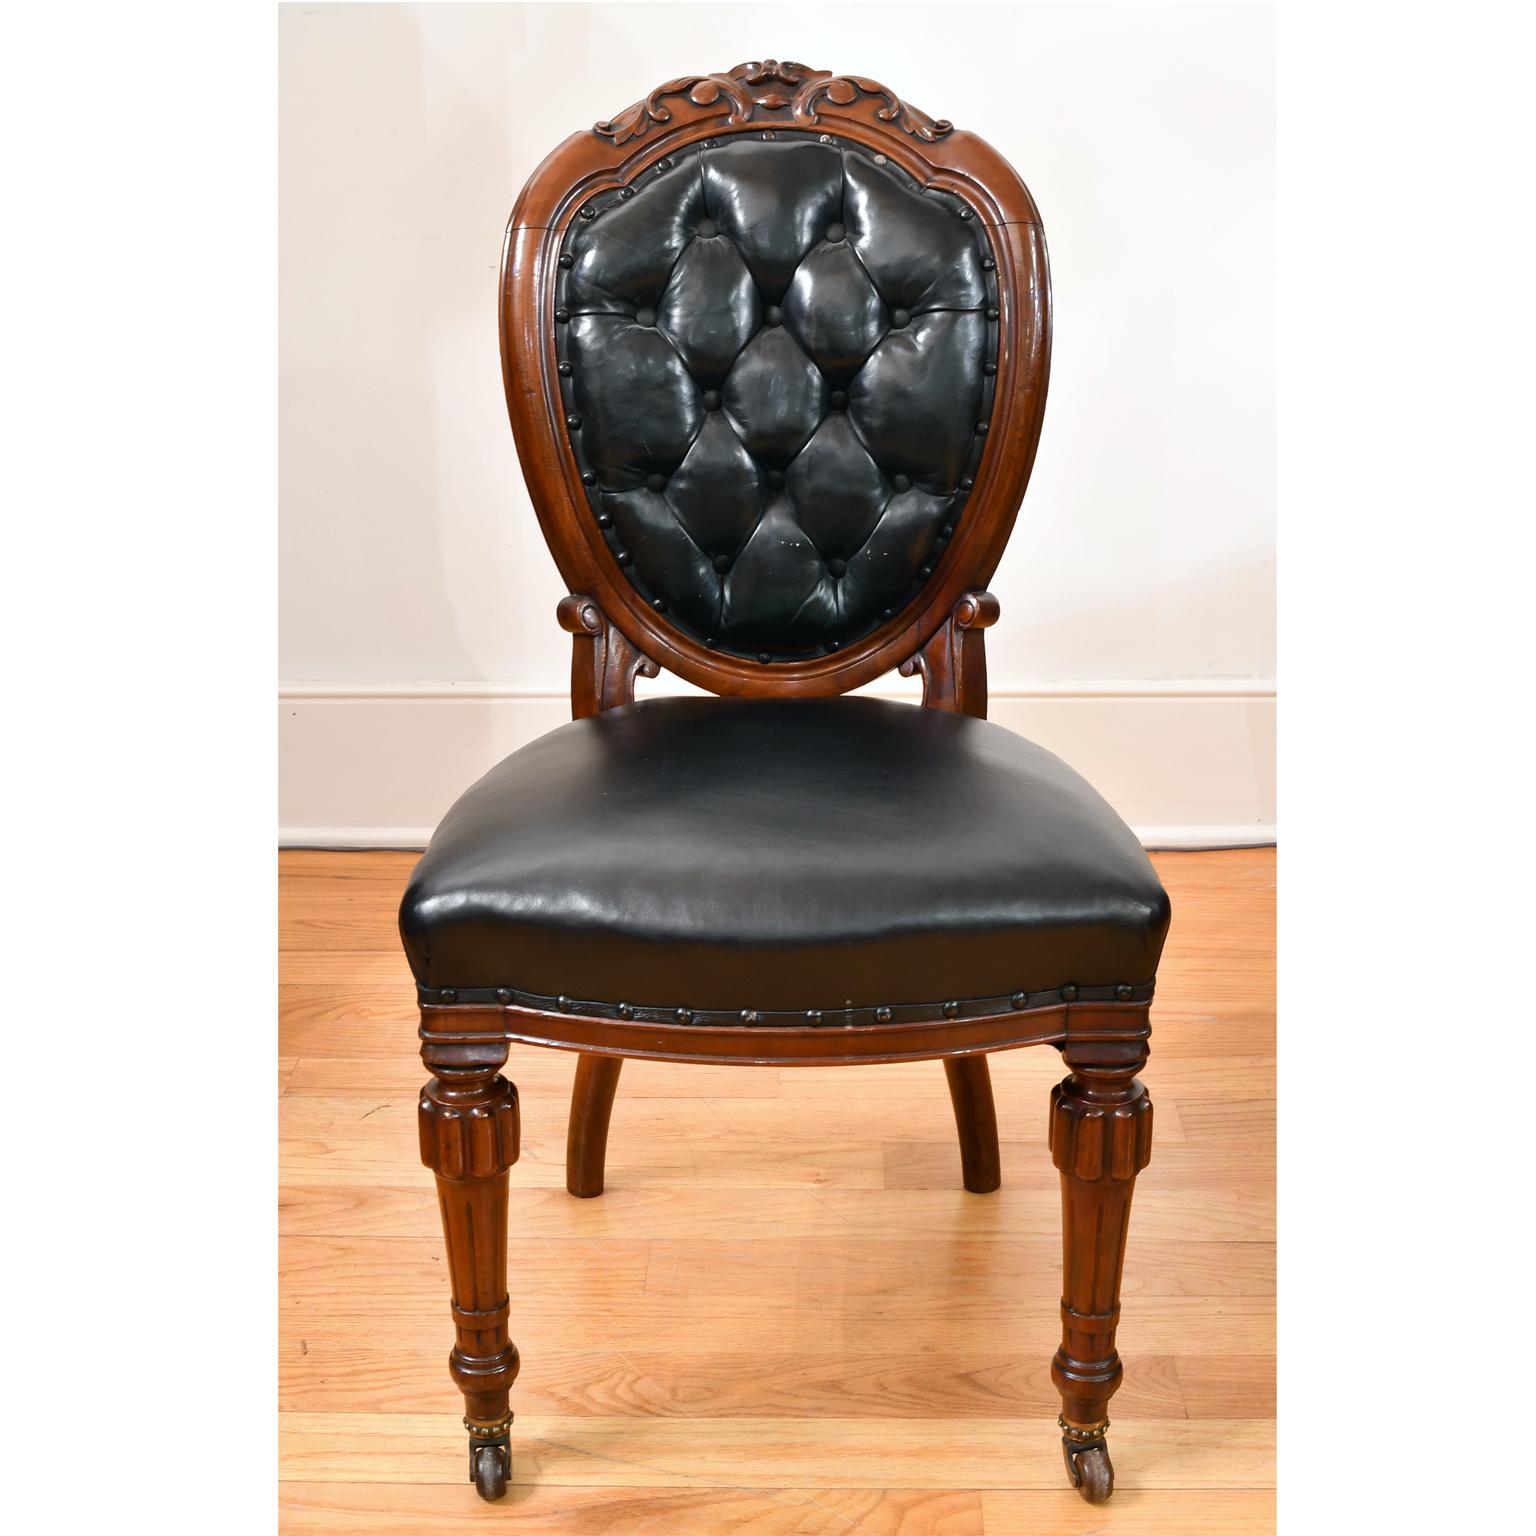 A very handsome & finely crafted set of 10 early Victorian dining chairs in mahogany with black leather upholstery on balloon back & seat. Chair frames are embellished with acanthus foliate carvings on crest rail, with turned & reeded front legs